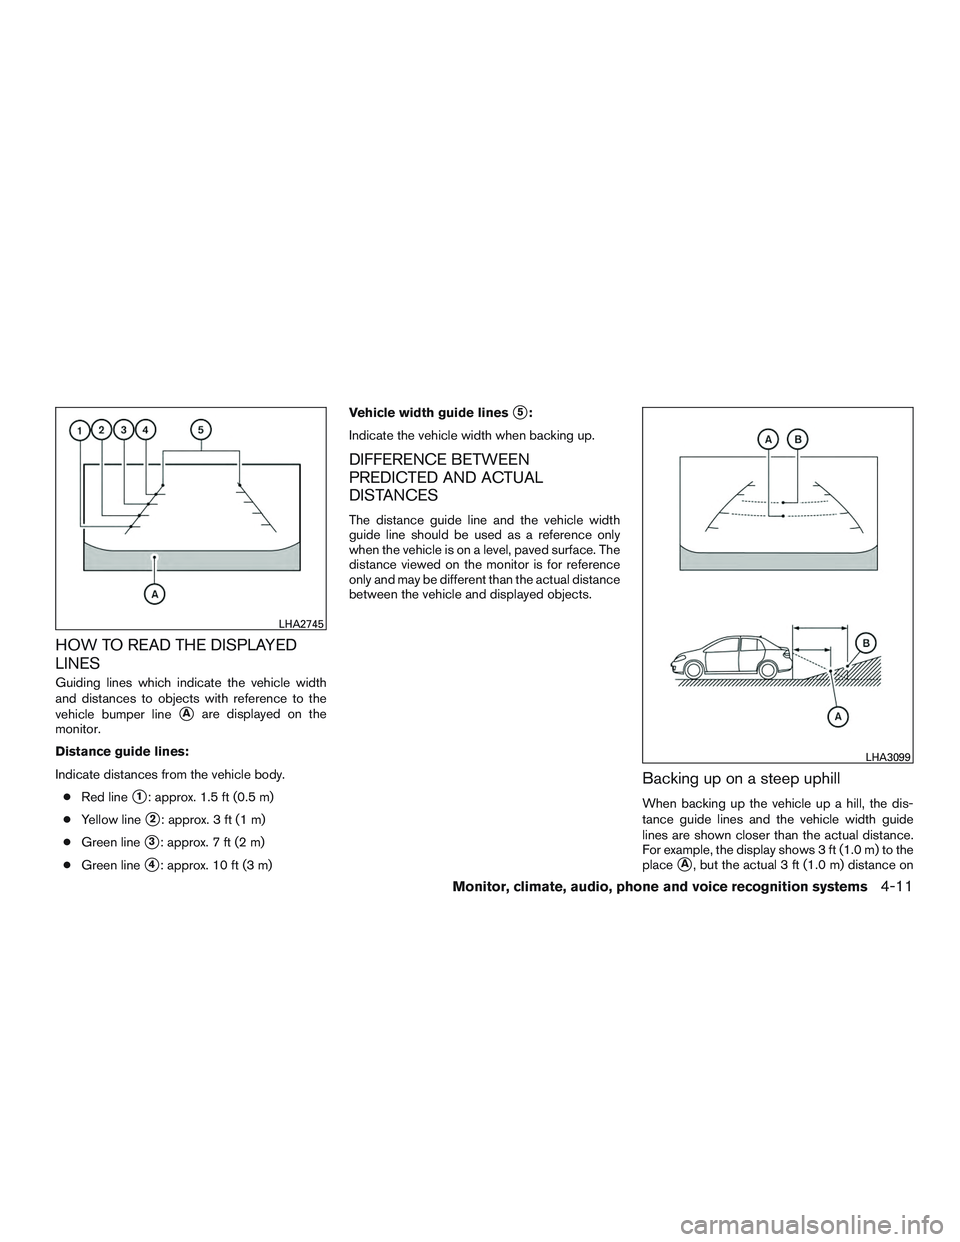 NISSAN ALTIMA SEDAN 2015  Owners Manual HOW TO READ THE DISPLAYED
LINES
Guiding lines which indicate the vehicle width
and distances to objects with reference to the
vehicle bumper line
Aare displayed on the
monitor.
Distance guide lines:
